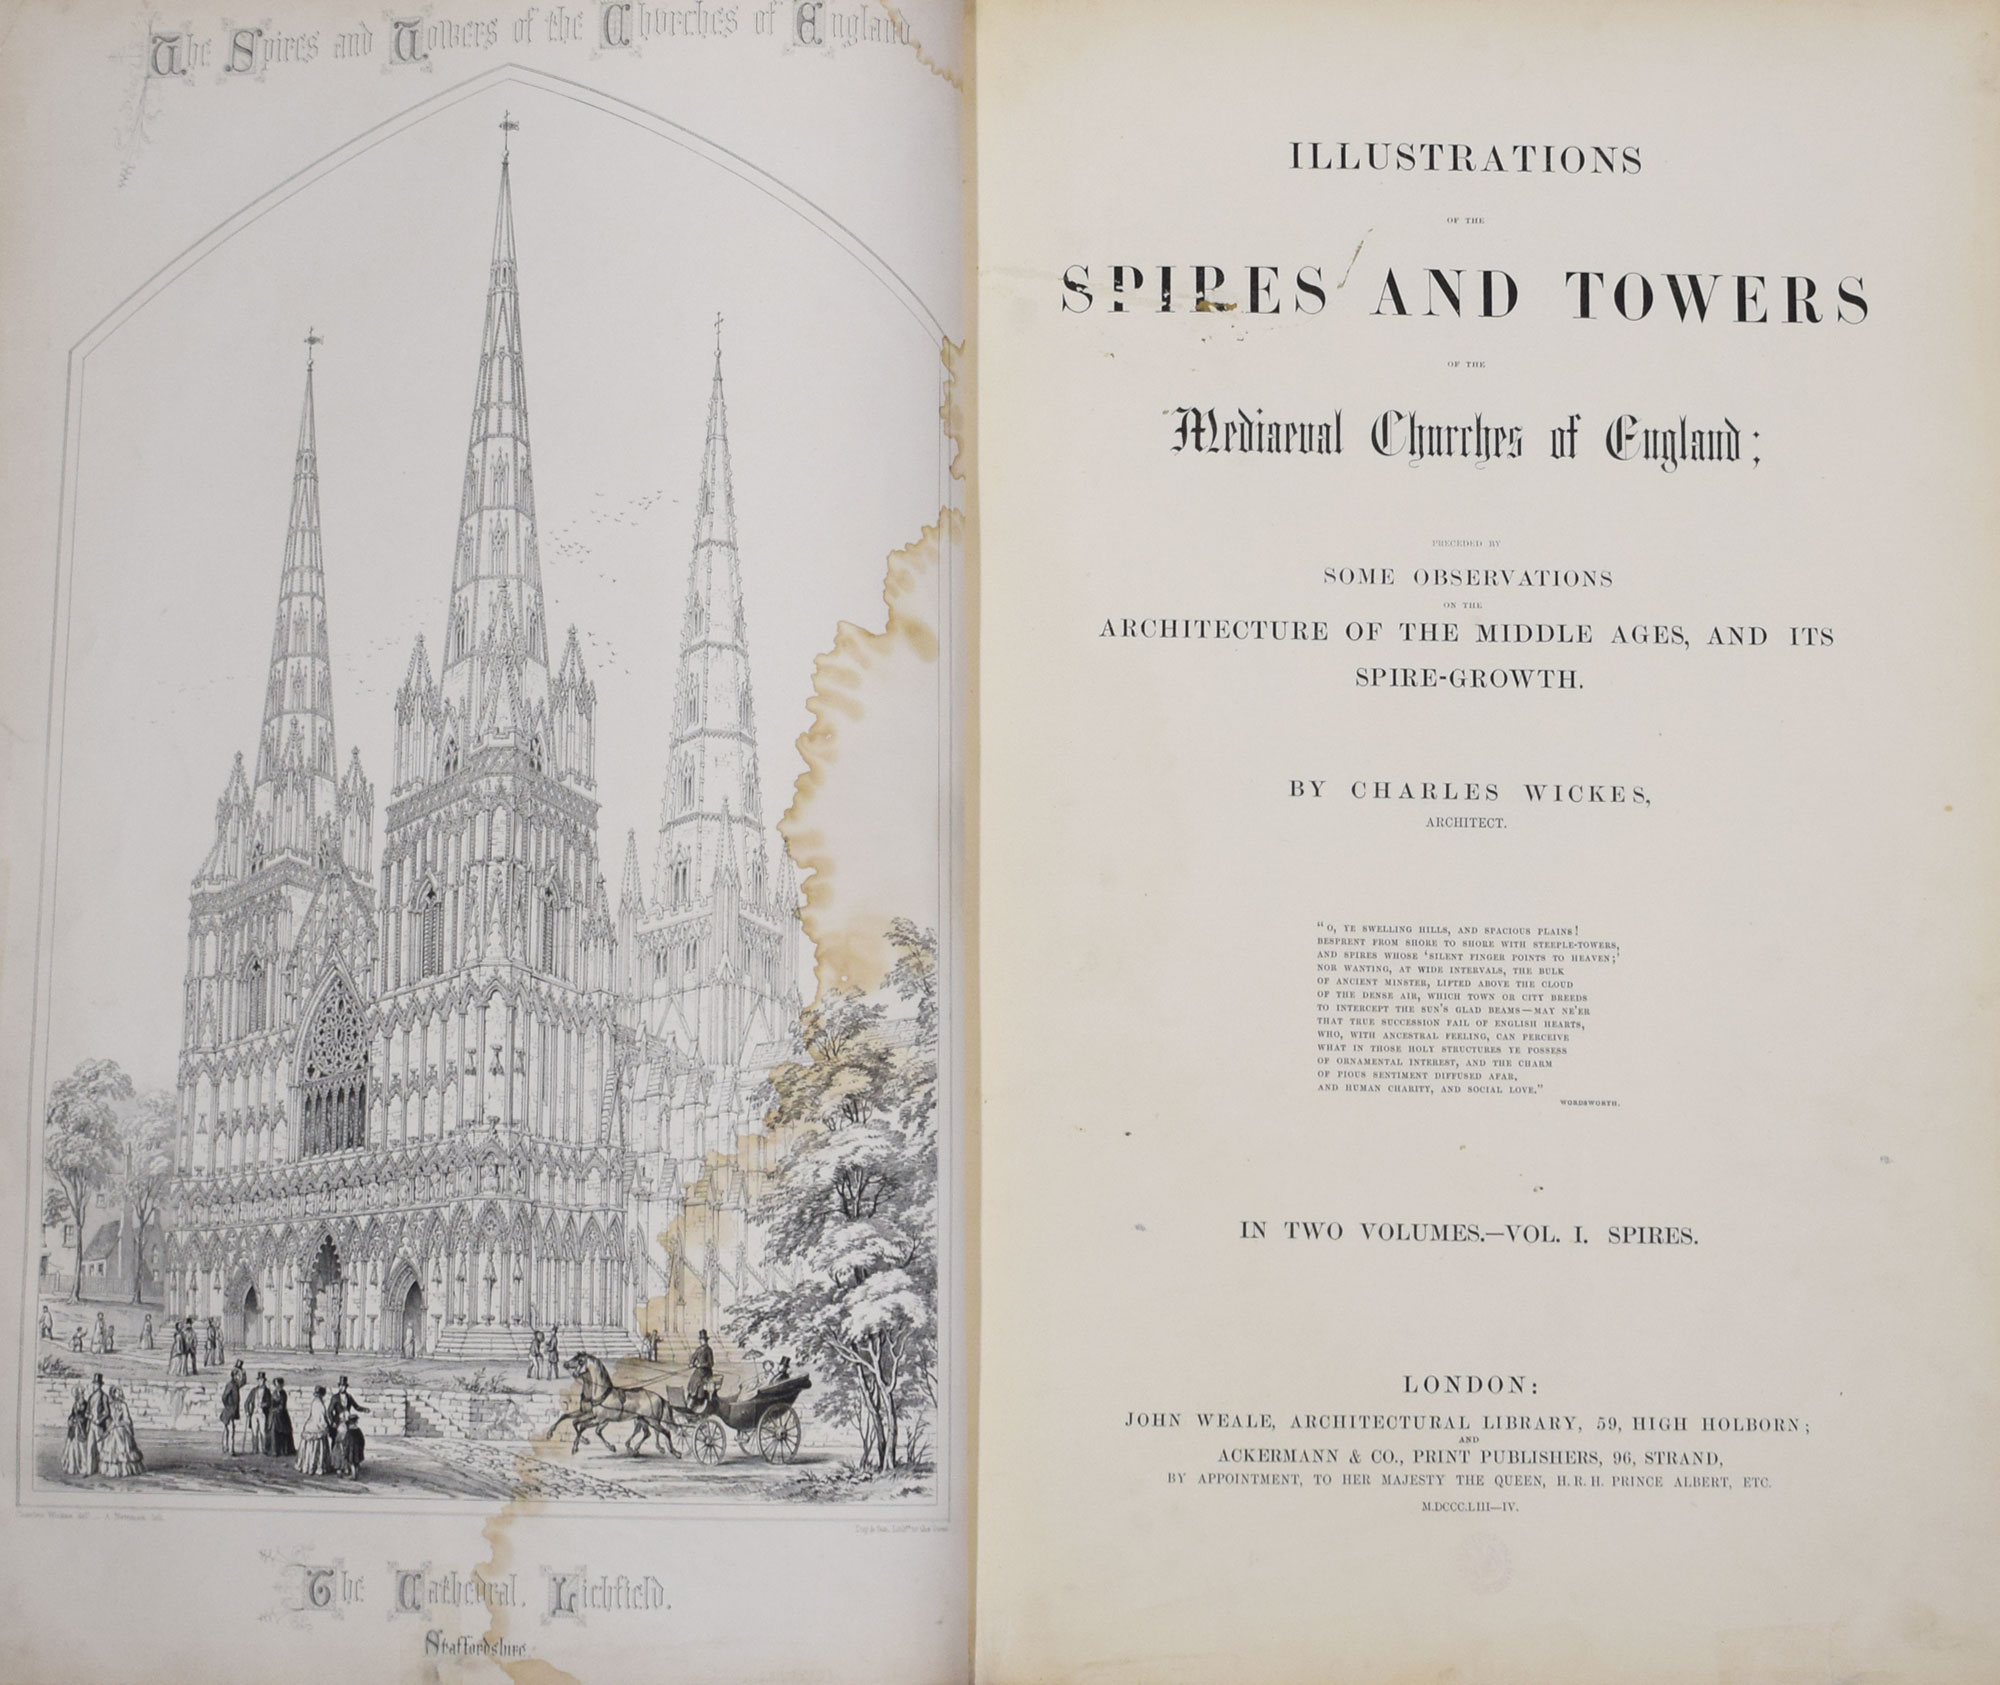 Illustrations of the Spires and Towers of the Mediaeval Churches of England (Volume I - Spires)